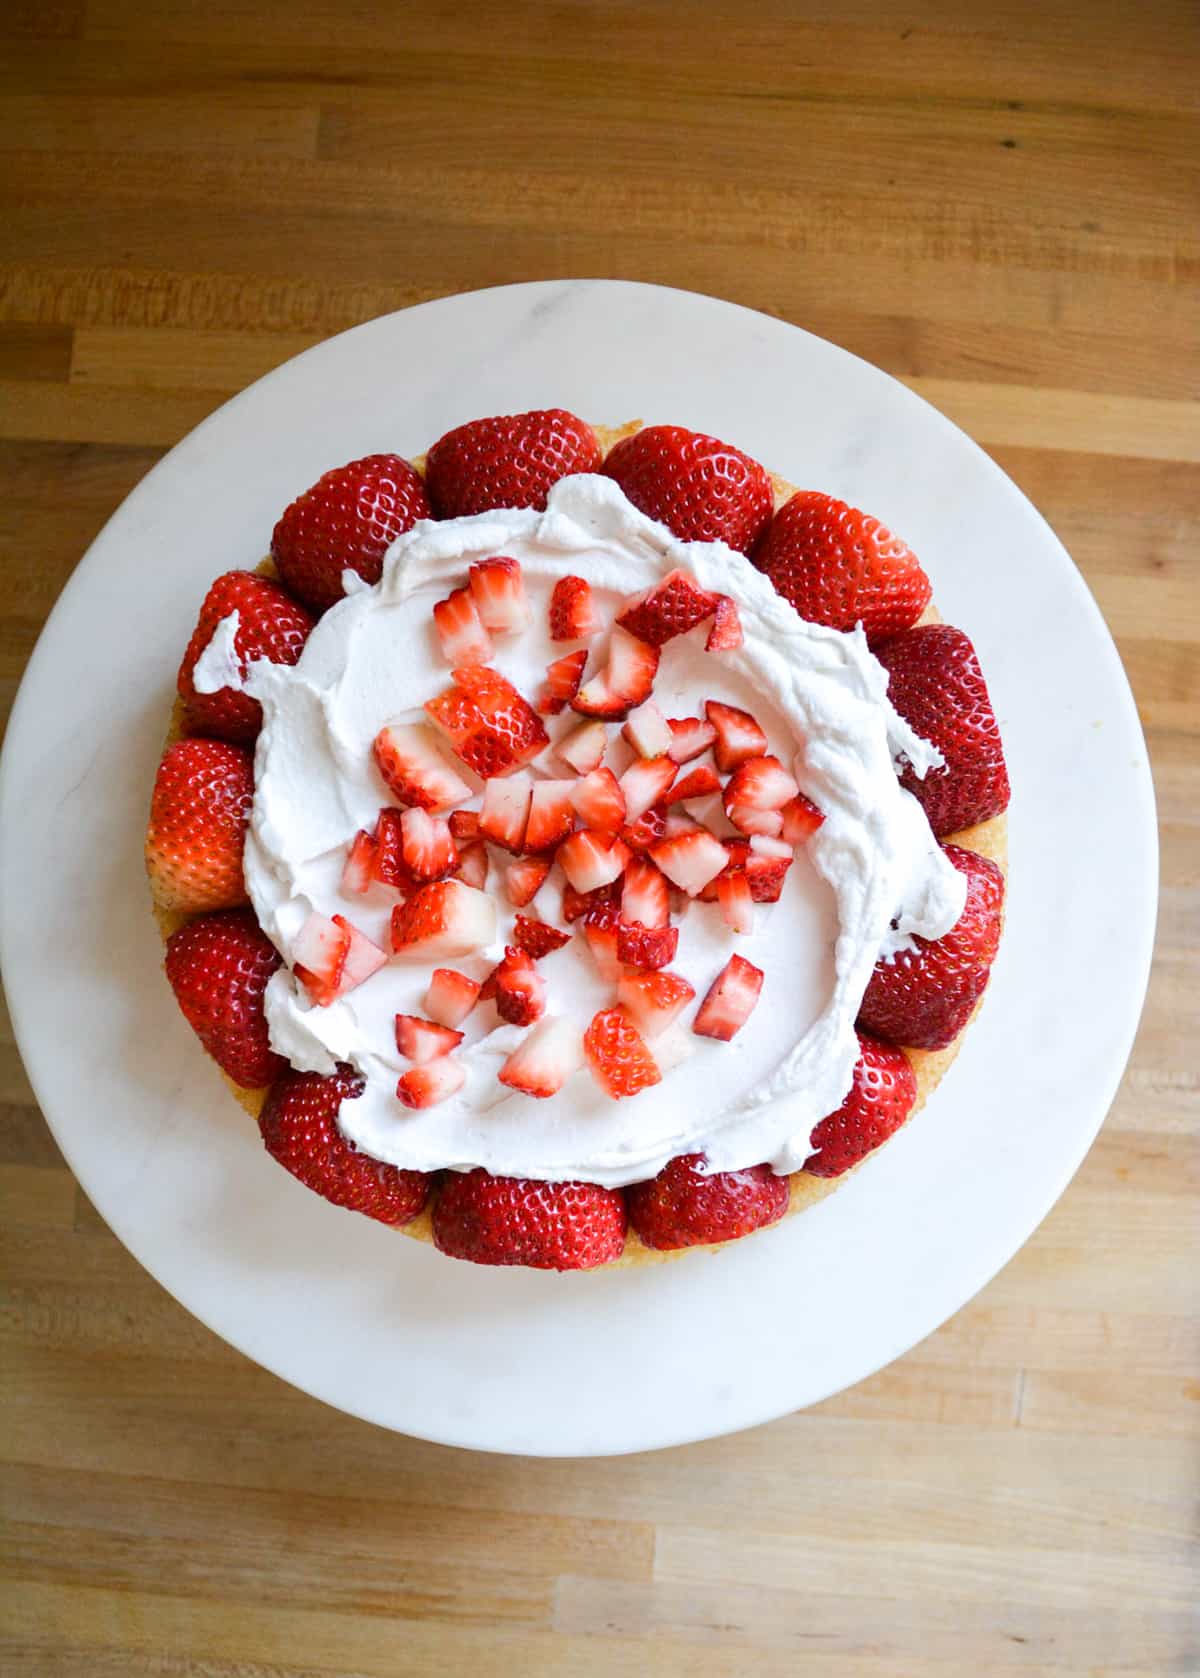 topping the whipped cream filling with chopped strawberries